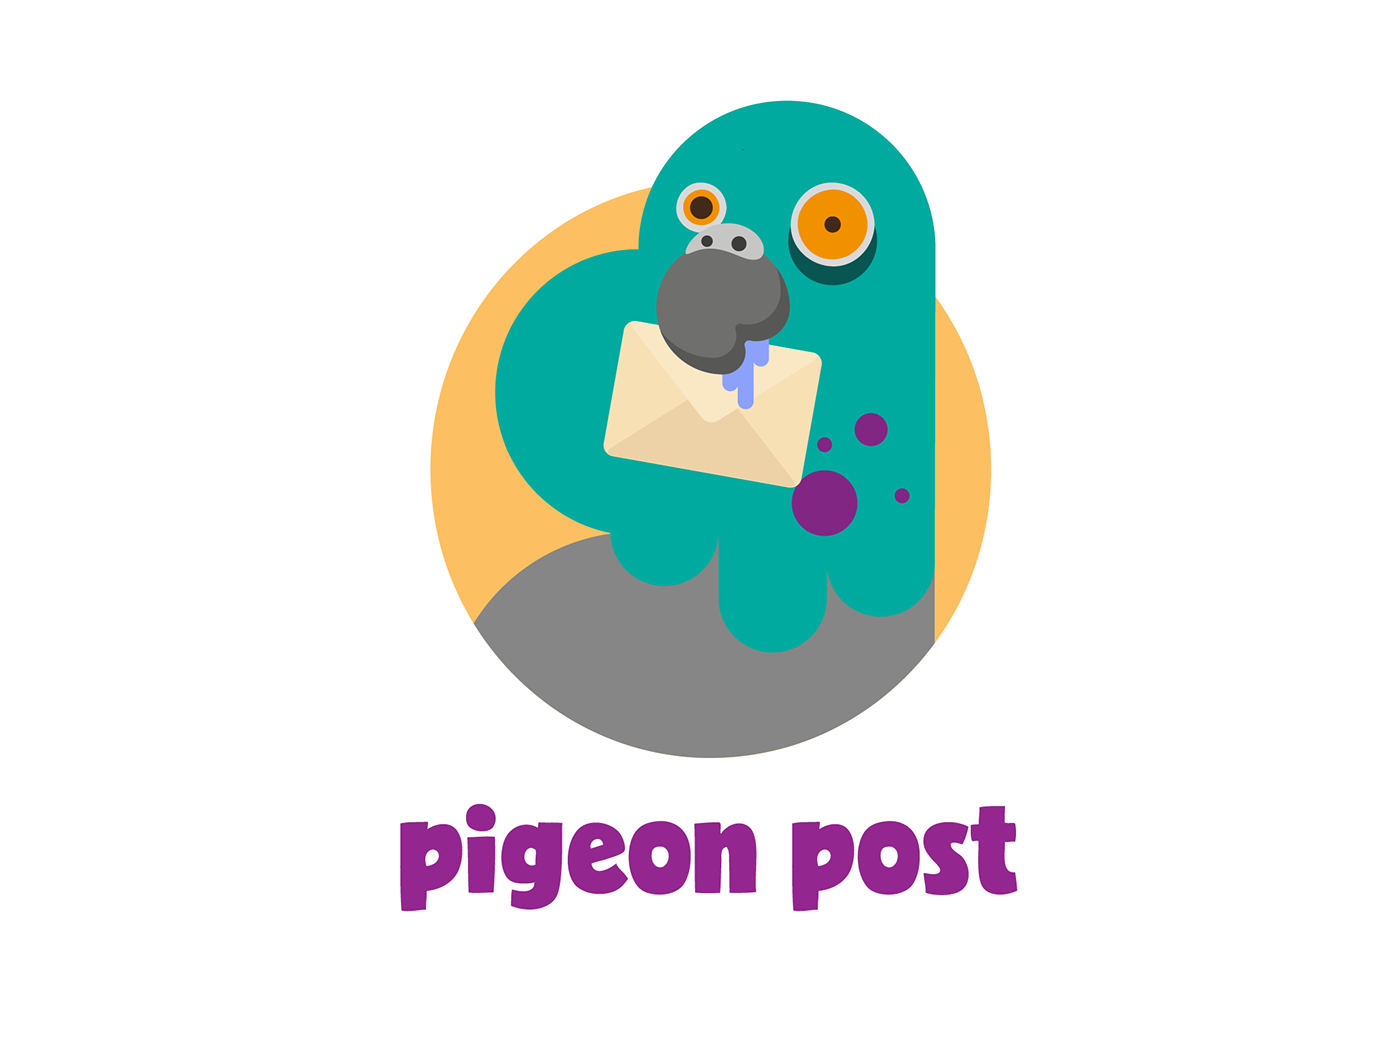 Pigeon clipart pigeon post. Game on behance in